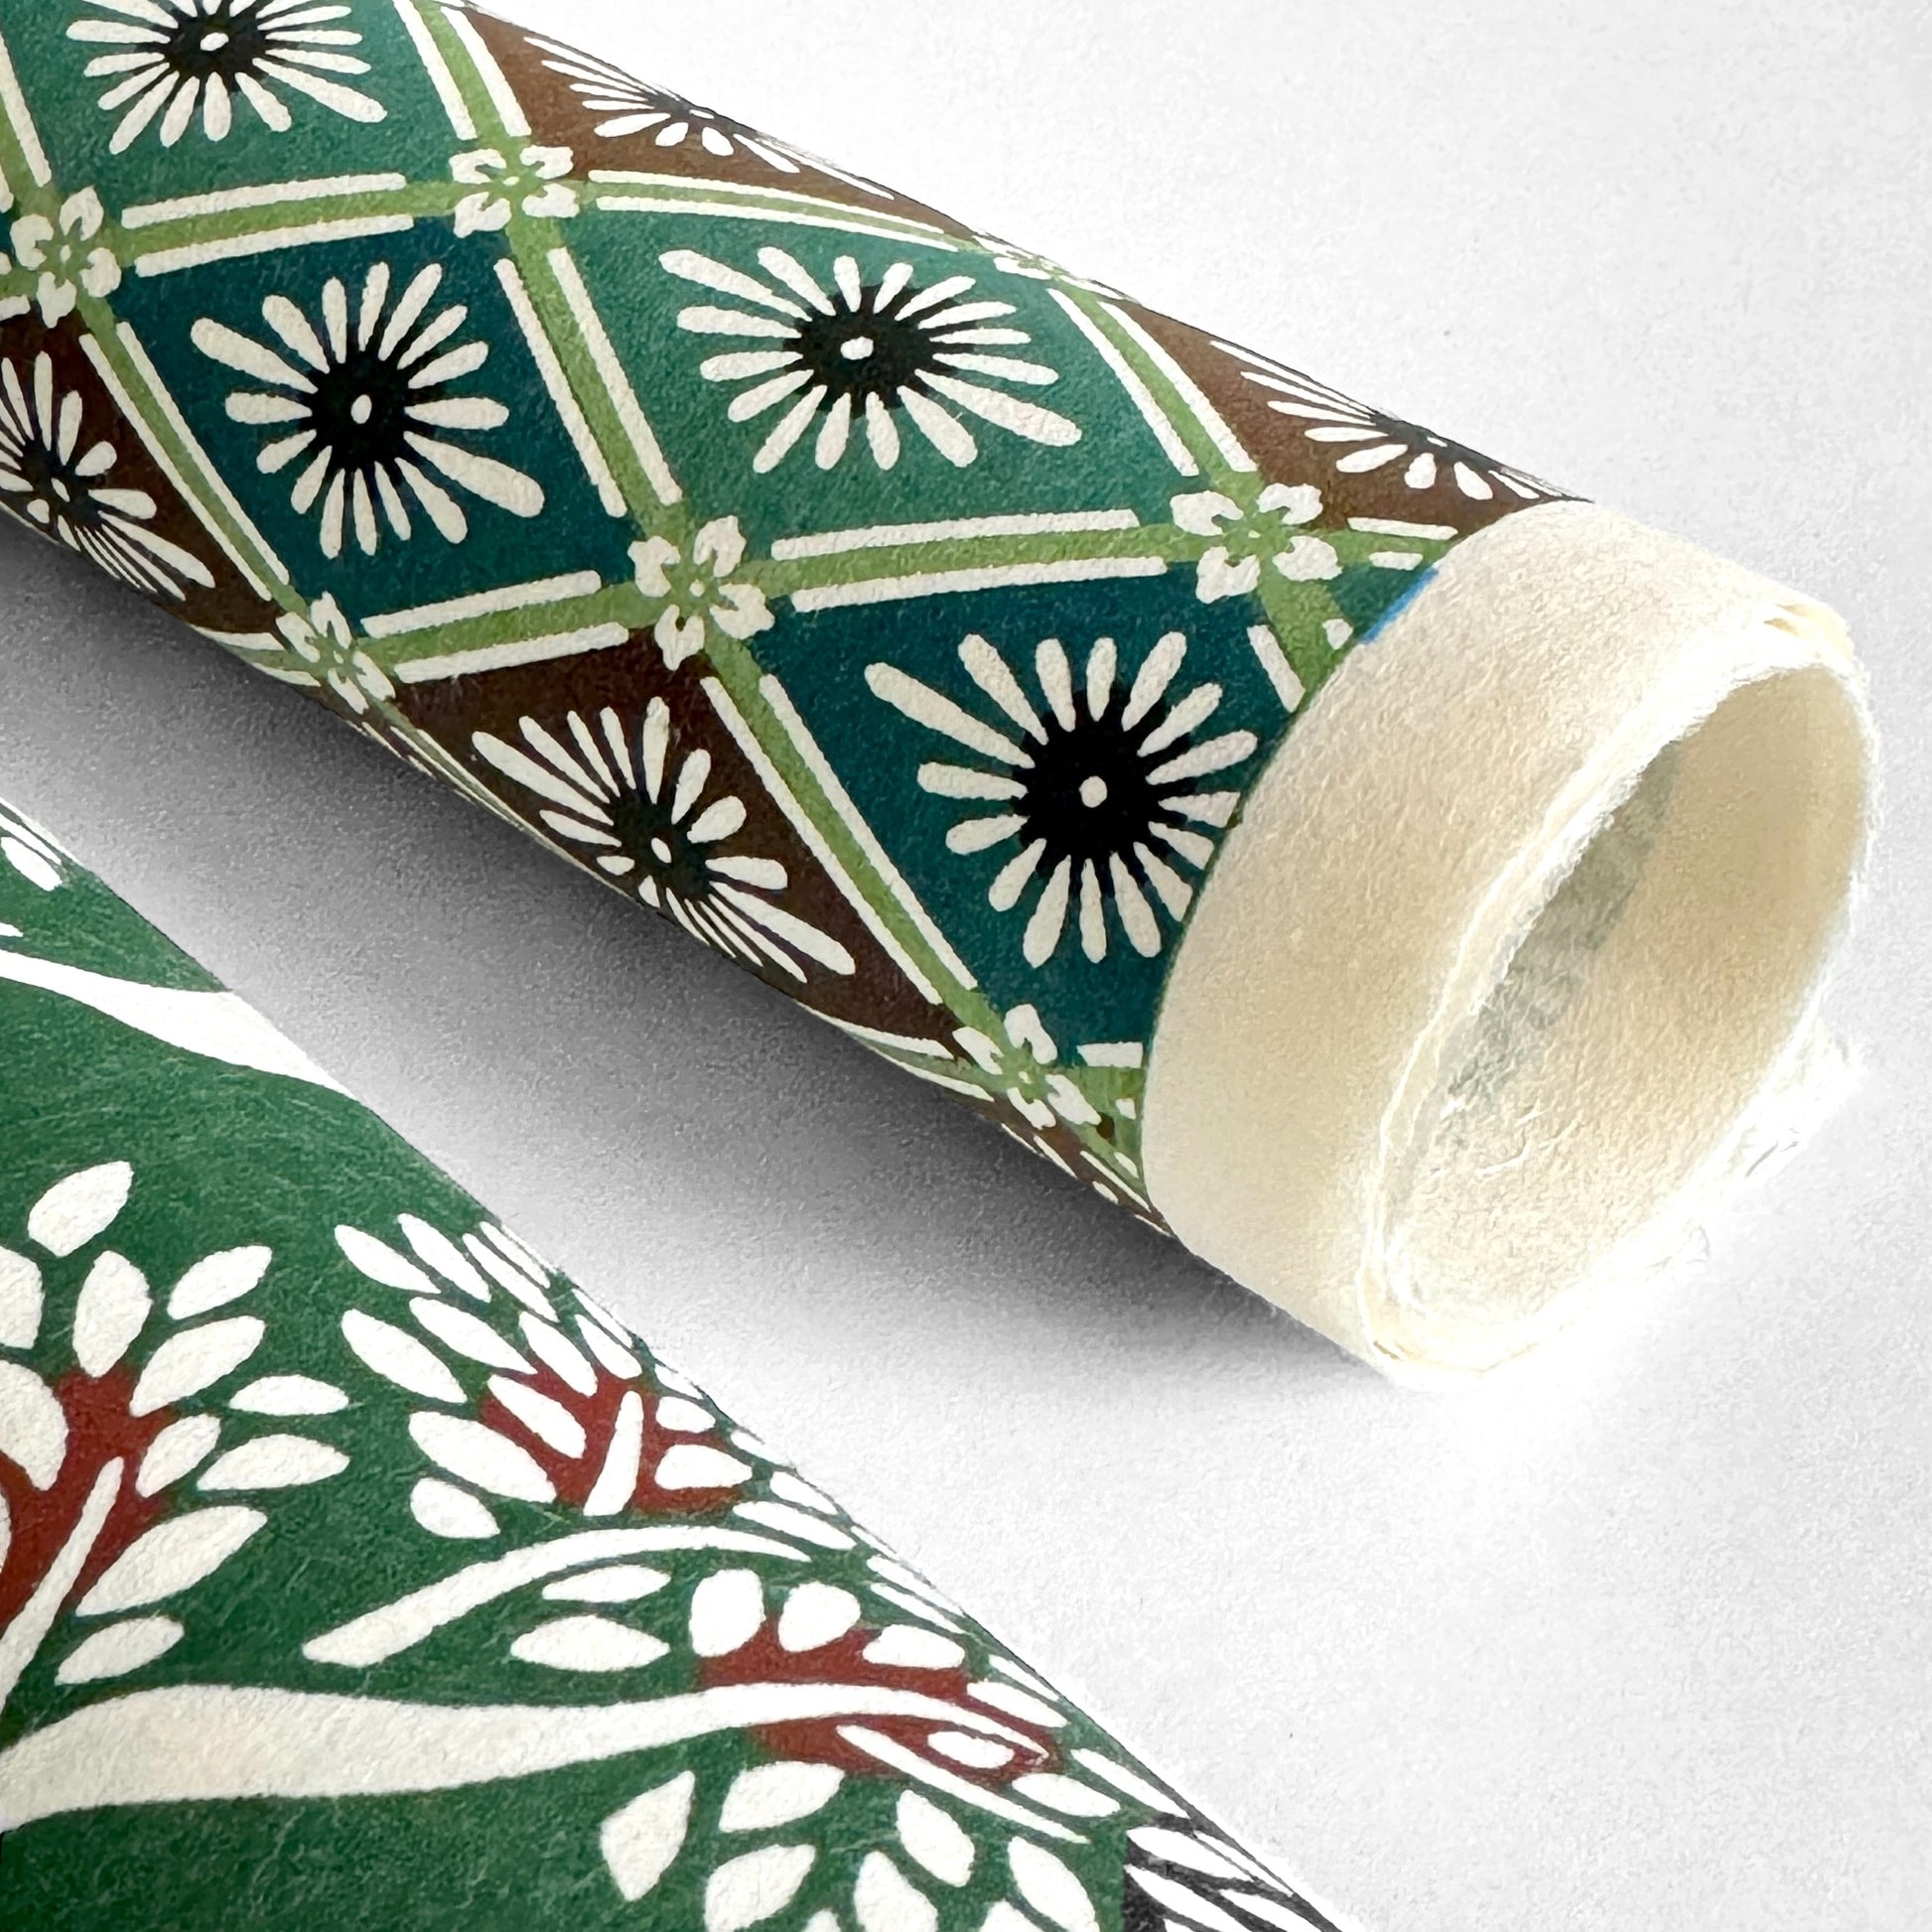 A Japanese stencil-dyed patterned paper with a repeat pattern of floral diamonds in tones of blue, aqua, brown and white. Pictured rolled to show the white deckled edge of the paper